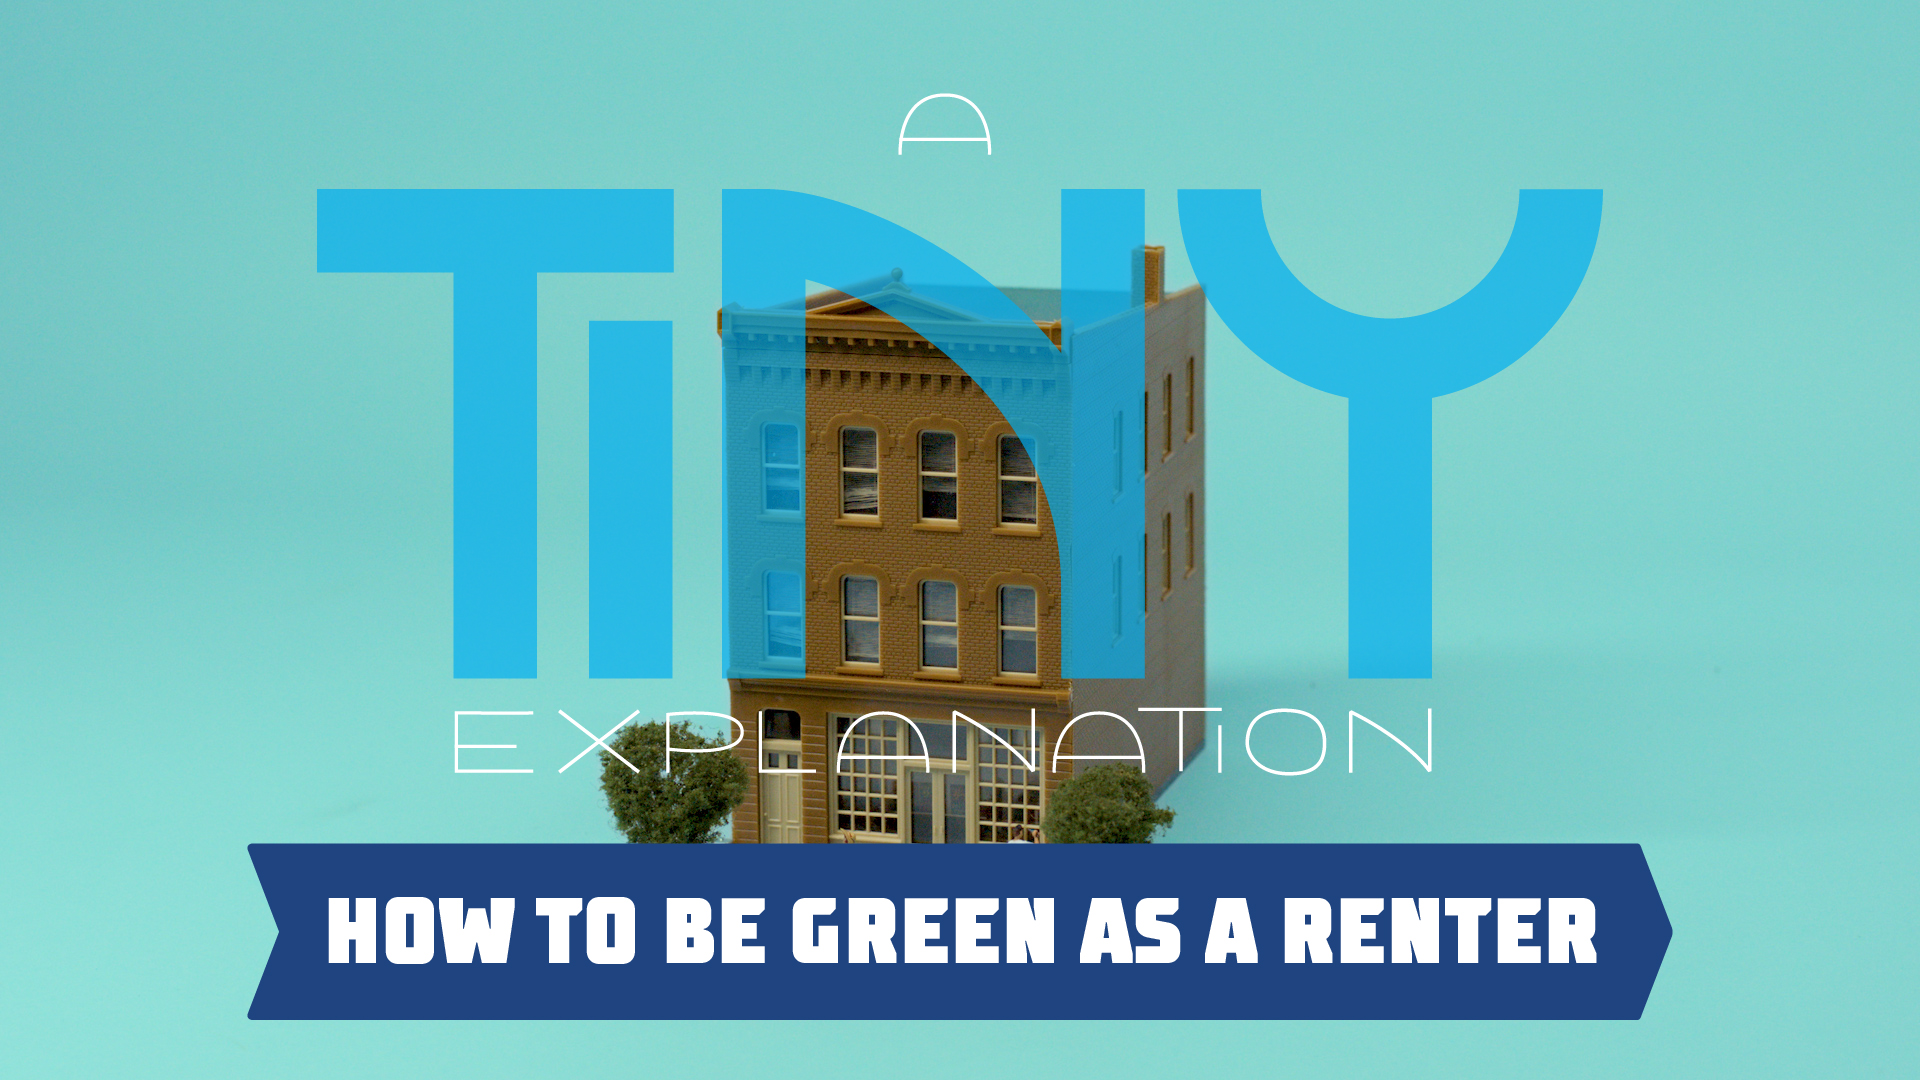 A Tiny Explanation: How To Be Green As A Renter